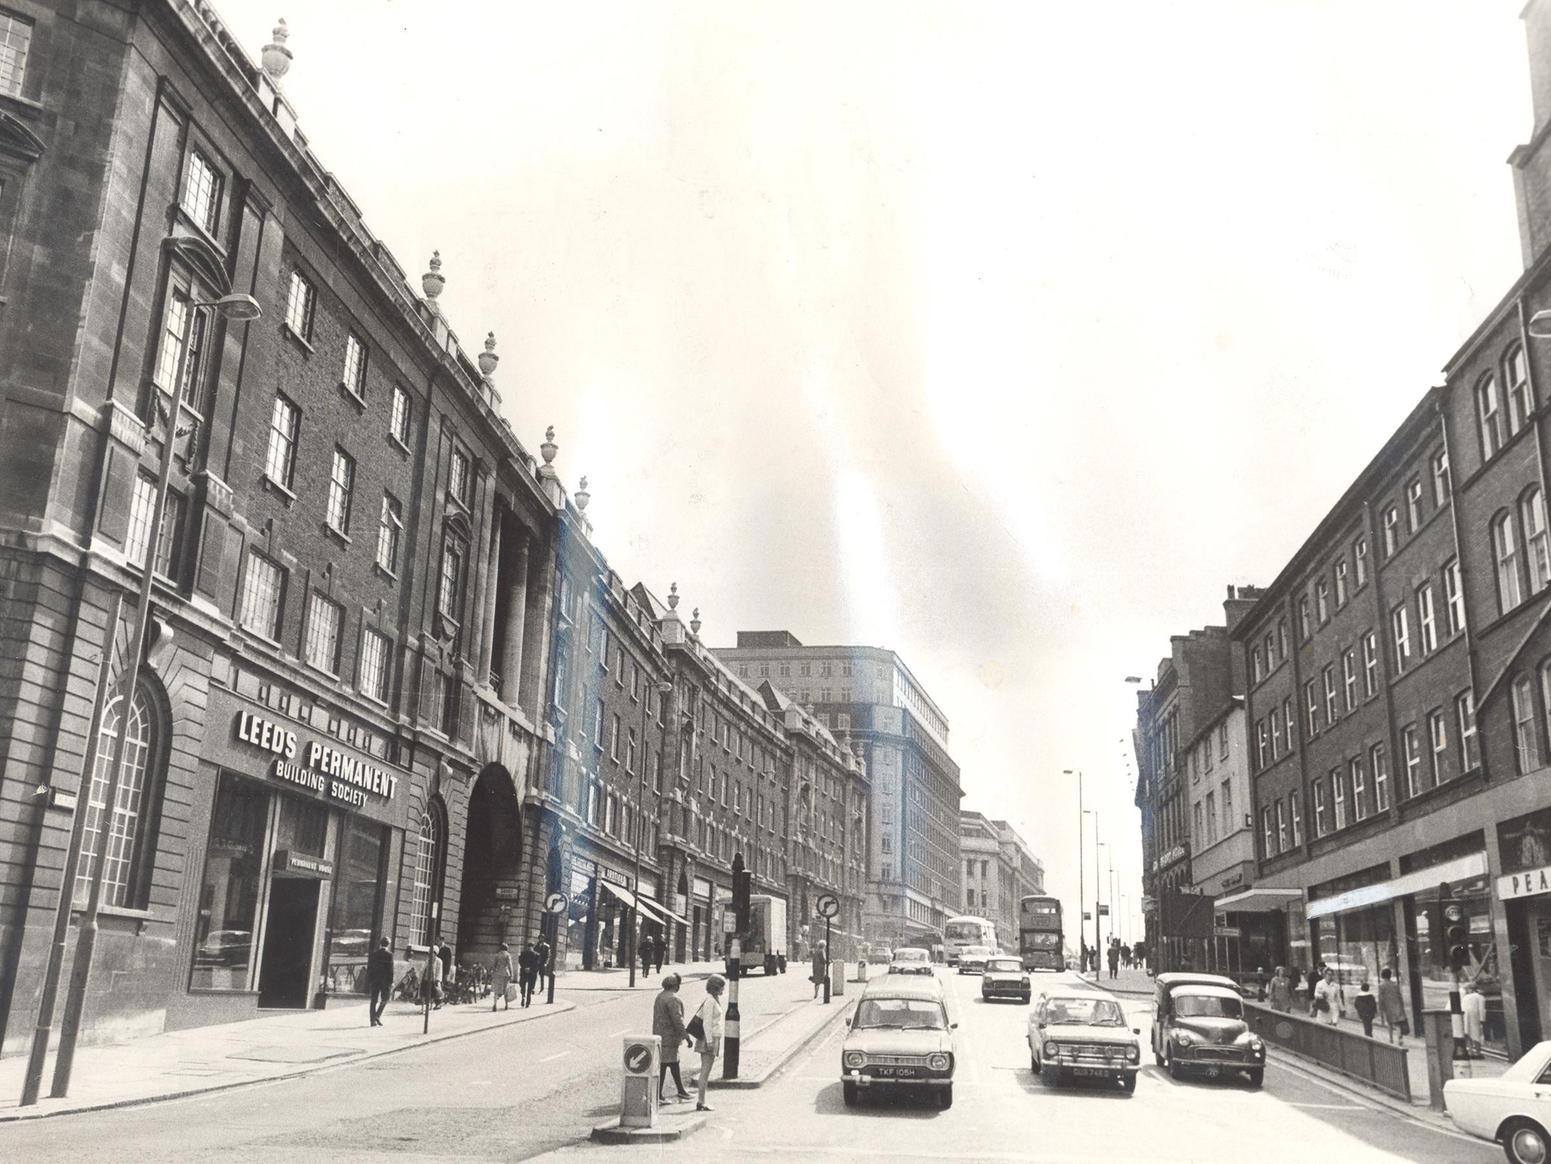 A summer's day on The Headrow in the early 1970s.